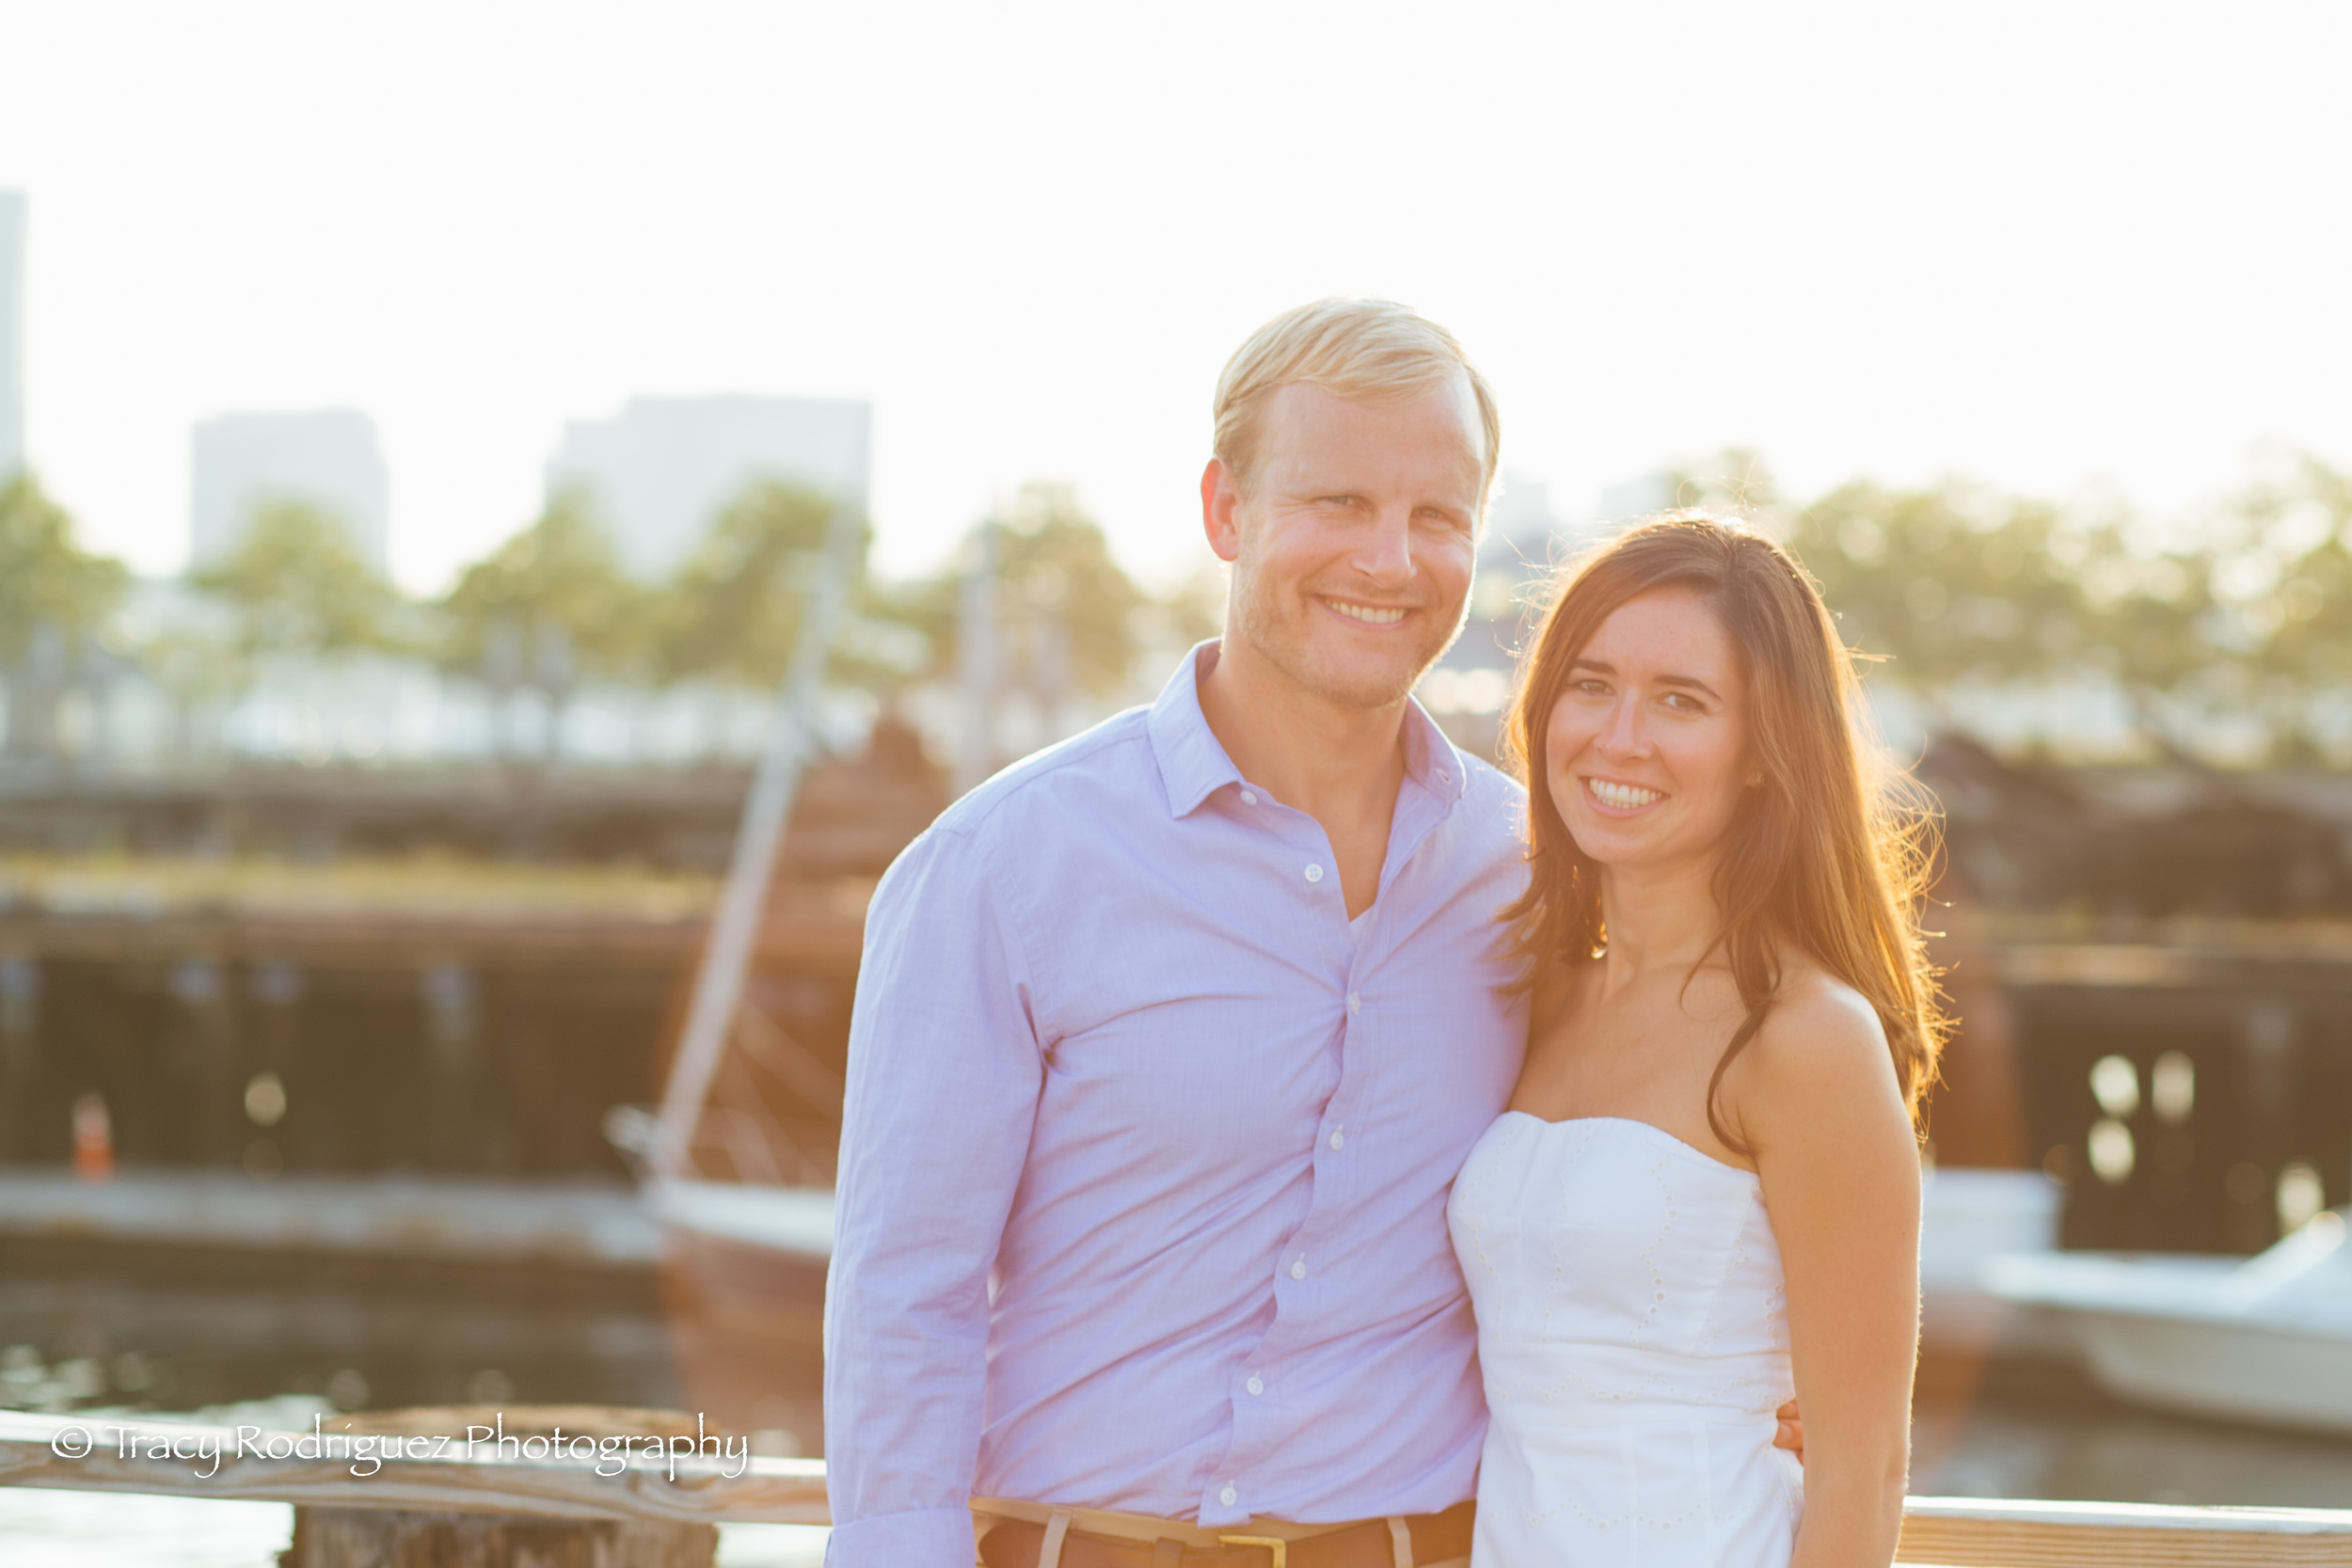 TracyRodriguezPhotography-Engagement-LowRes-8.jpg